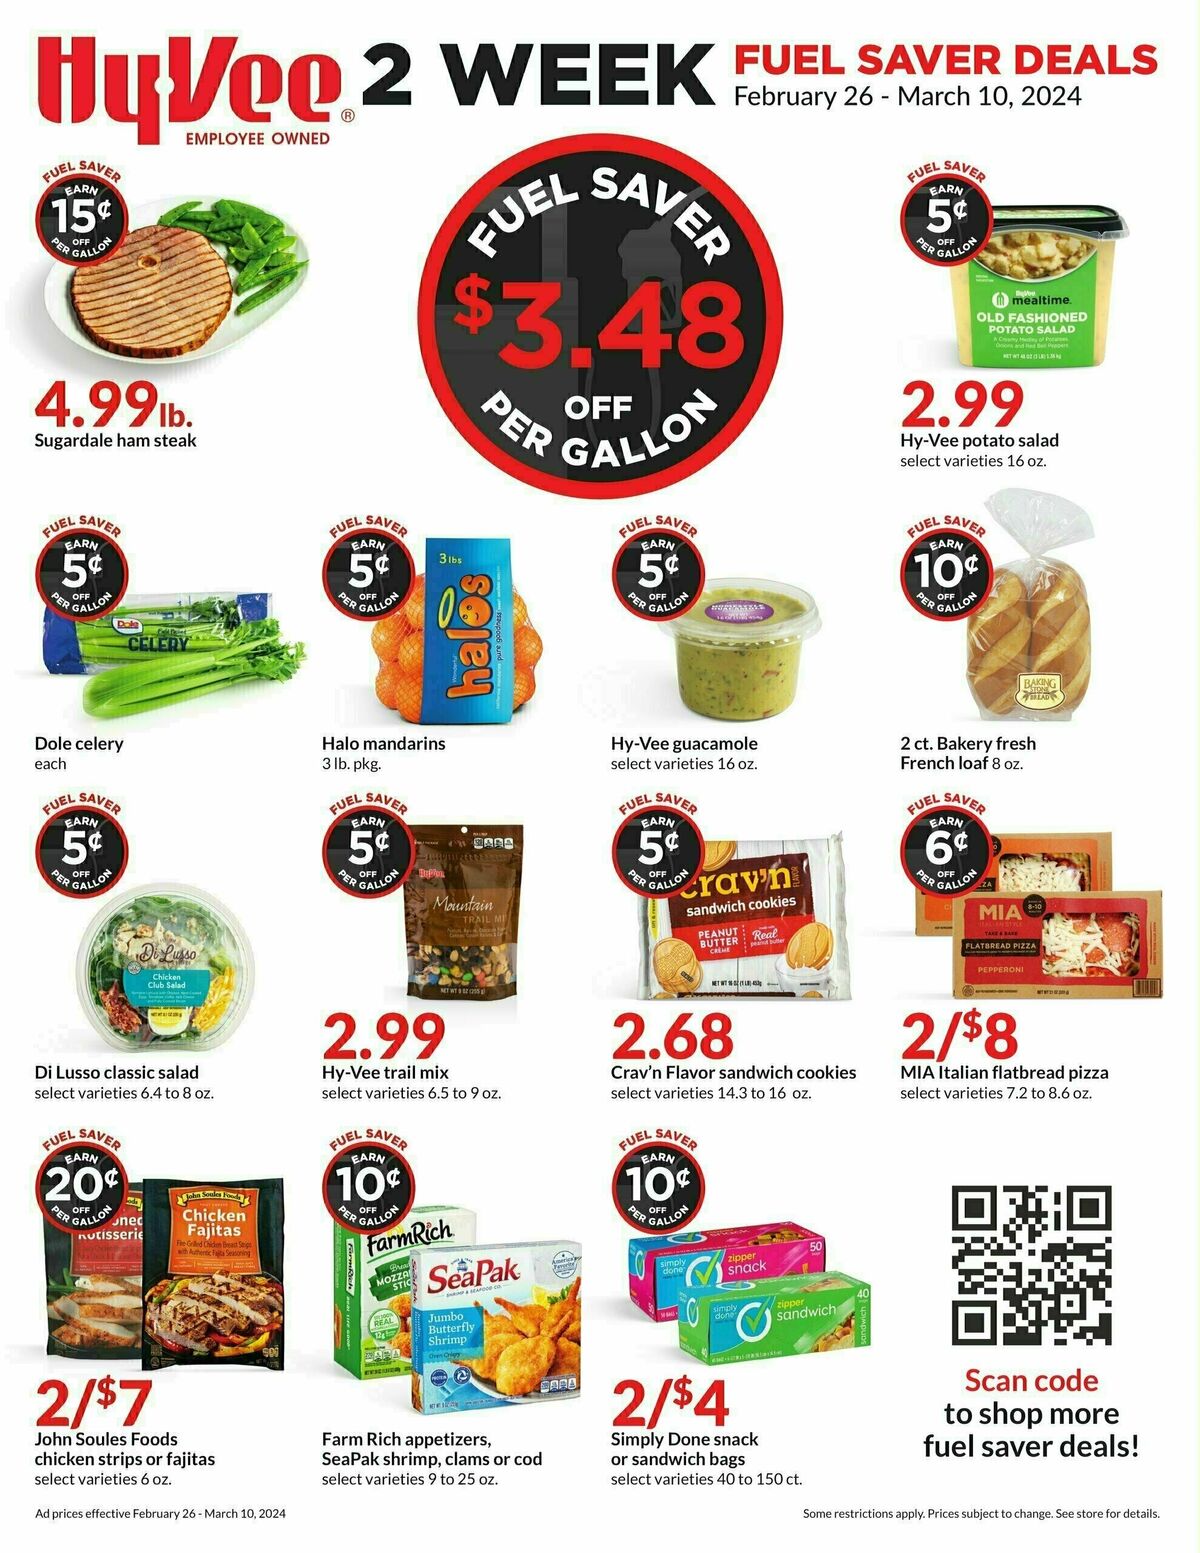 Hy-Vee 2 Week Fuel Saver Deals Weekly Ad from February 26